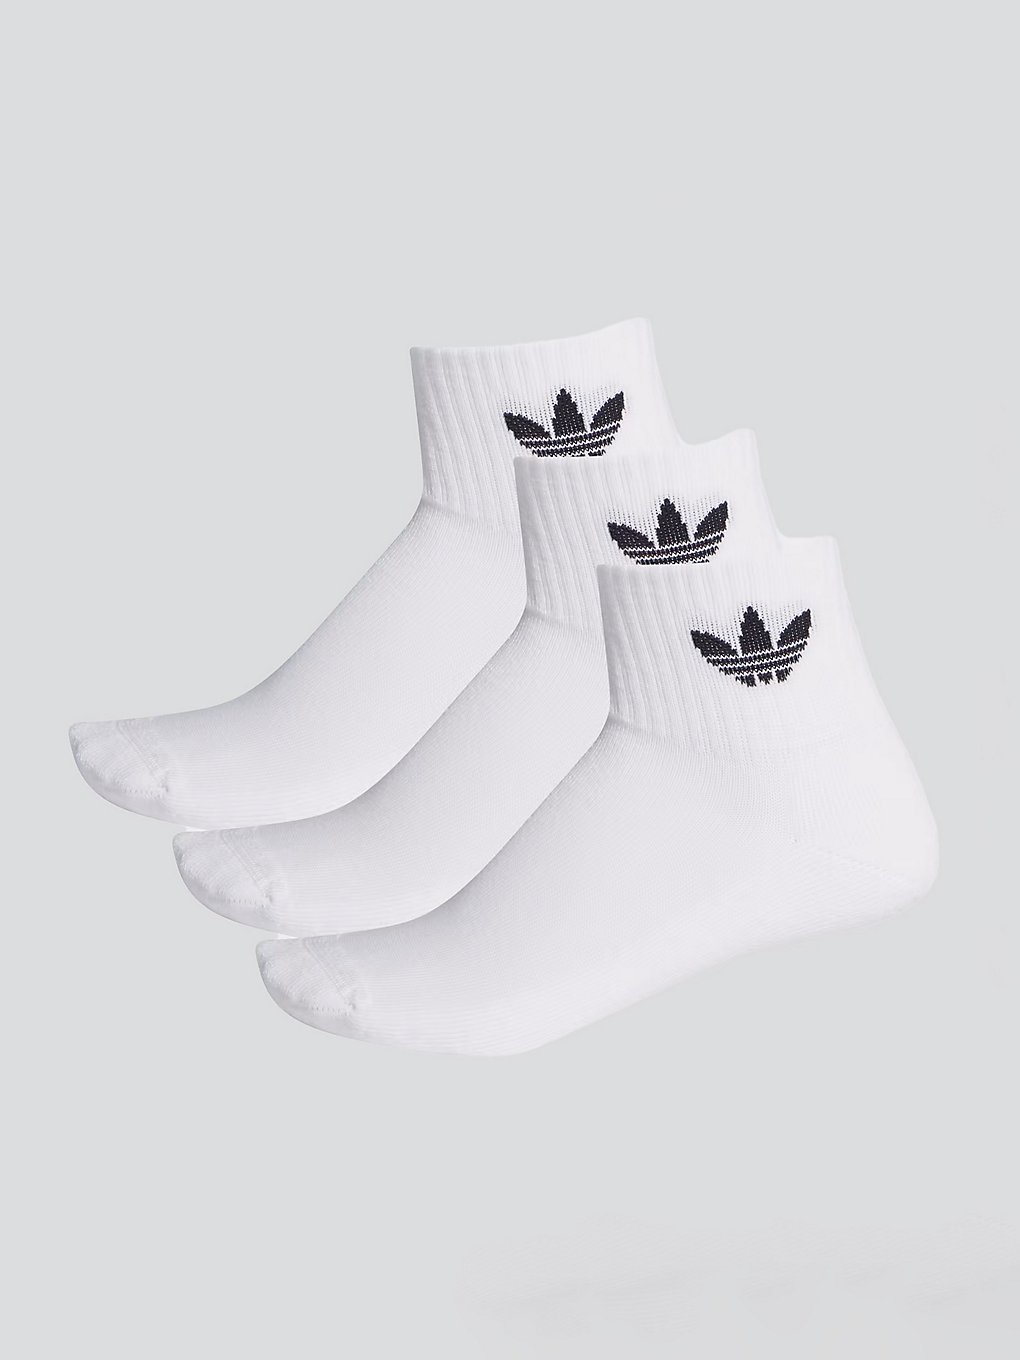 Image of adidas Originals Mid Ankle Calze bianco